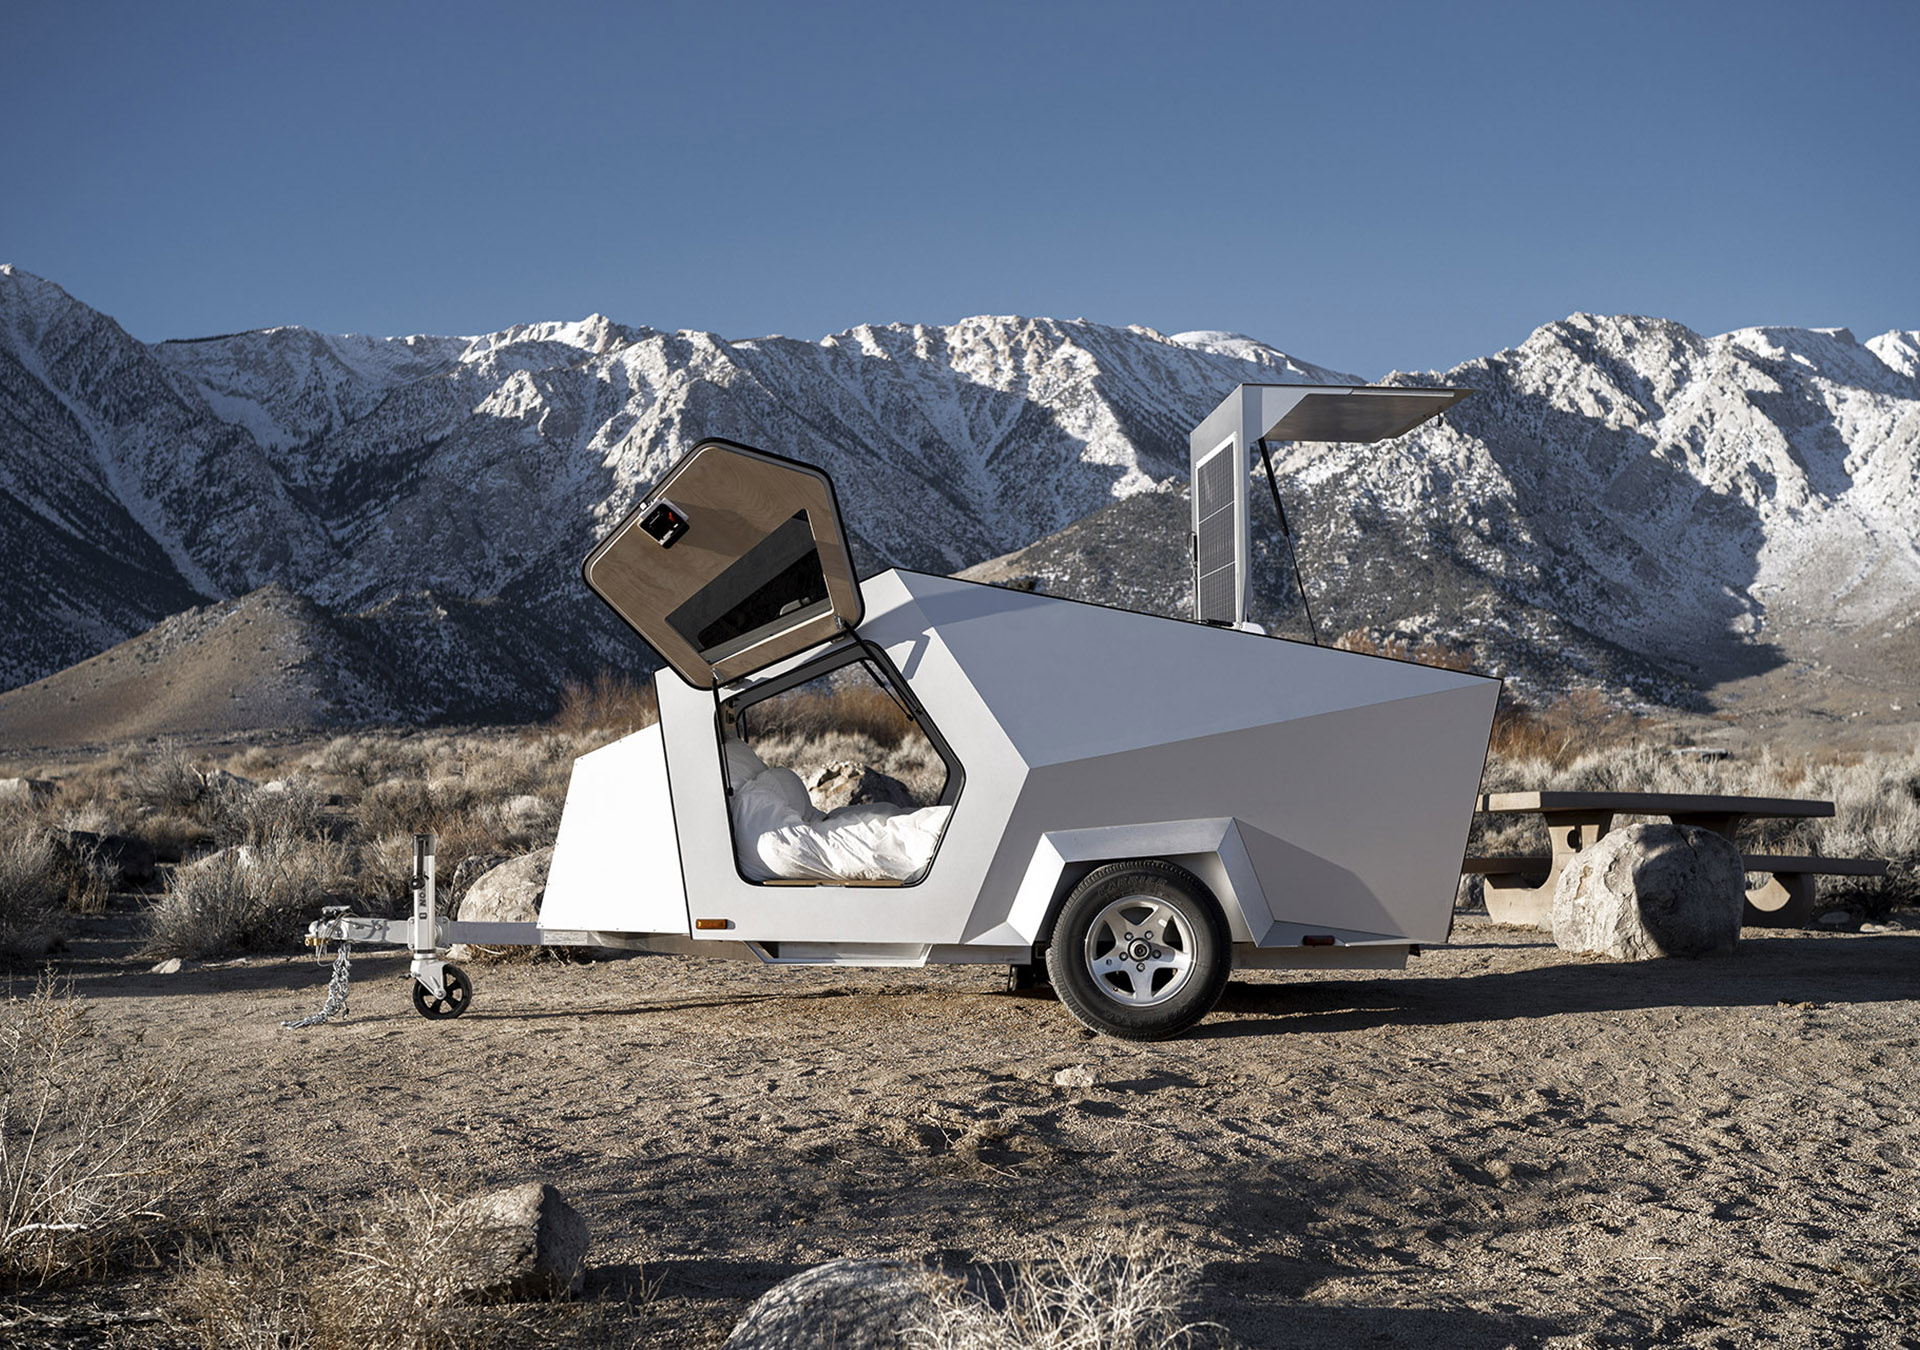 Polydrop, the electric travel trailer. A campsite that does not compromise comfort